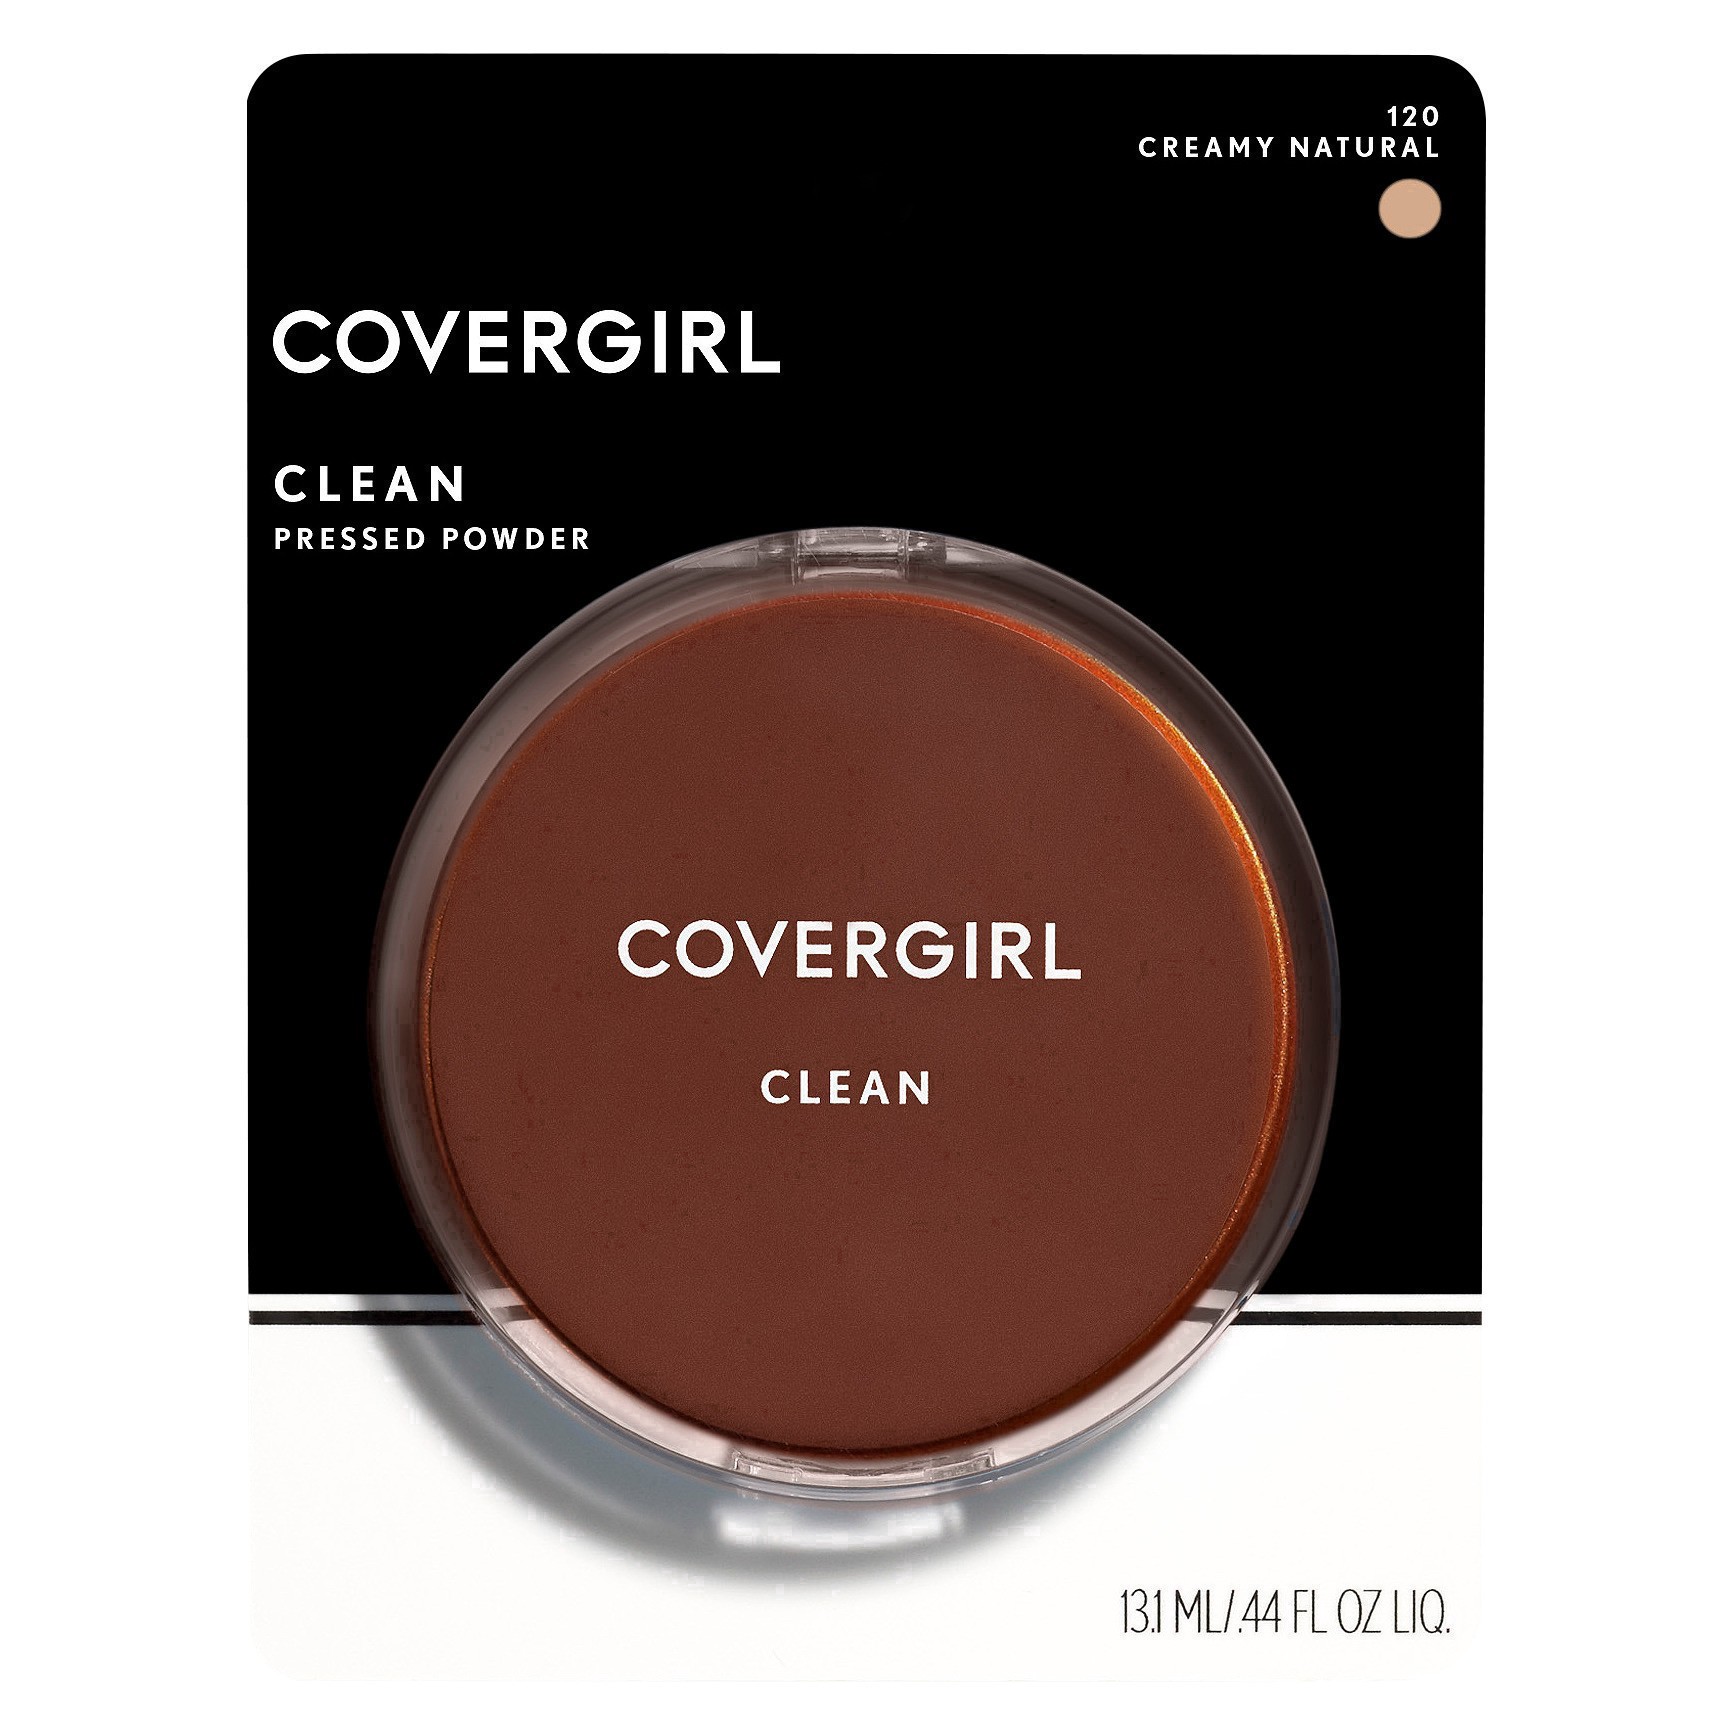 slide 14 of 34, Covergirl Clean Pressed Powder, Creamy Natural, Lasting Setting Powder, 0.39 oz , Won't Clog Pores, Hypoallergenic, Dermatologist Tested, Shine-Free Formula, Smooth and Natural, 11 g